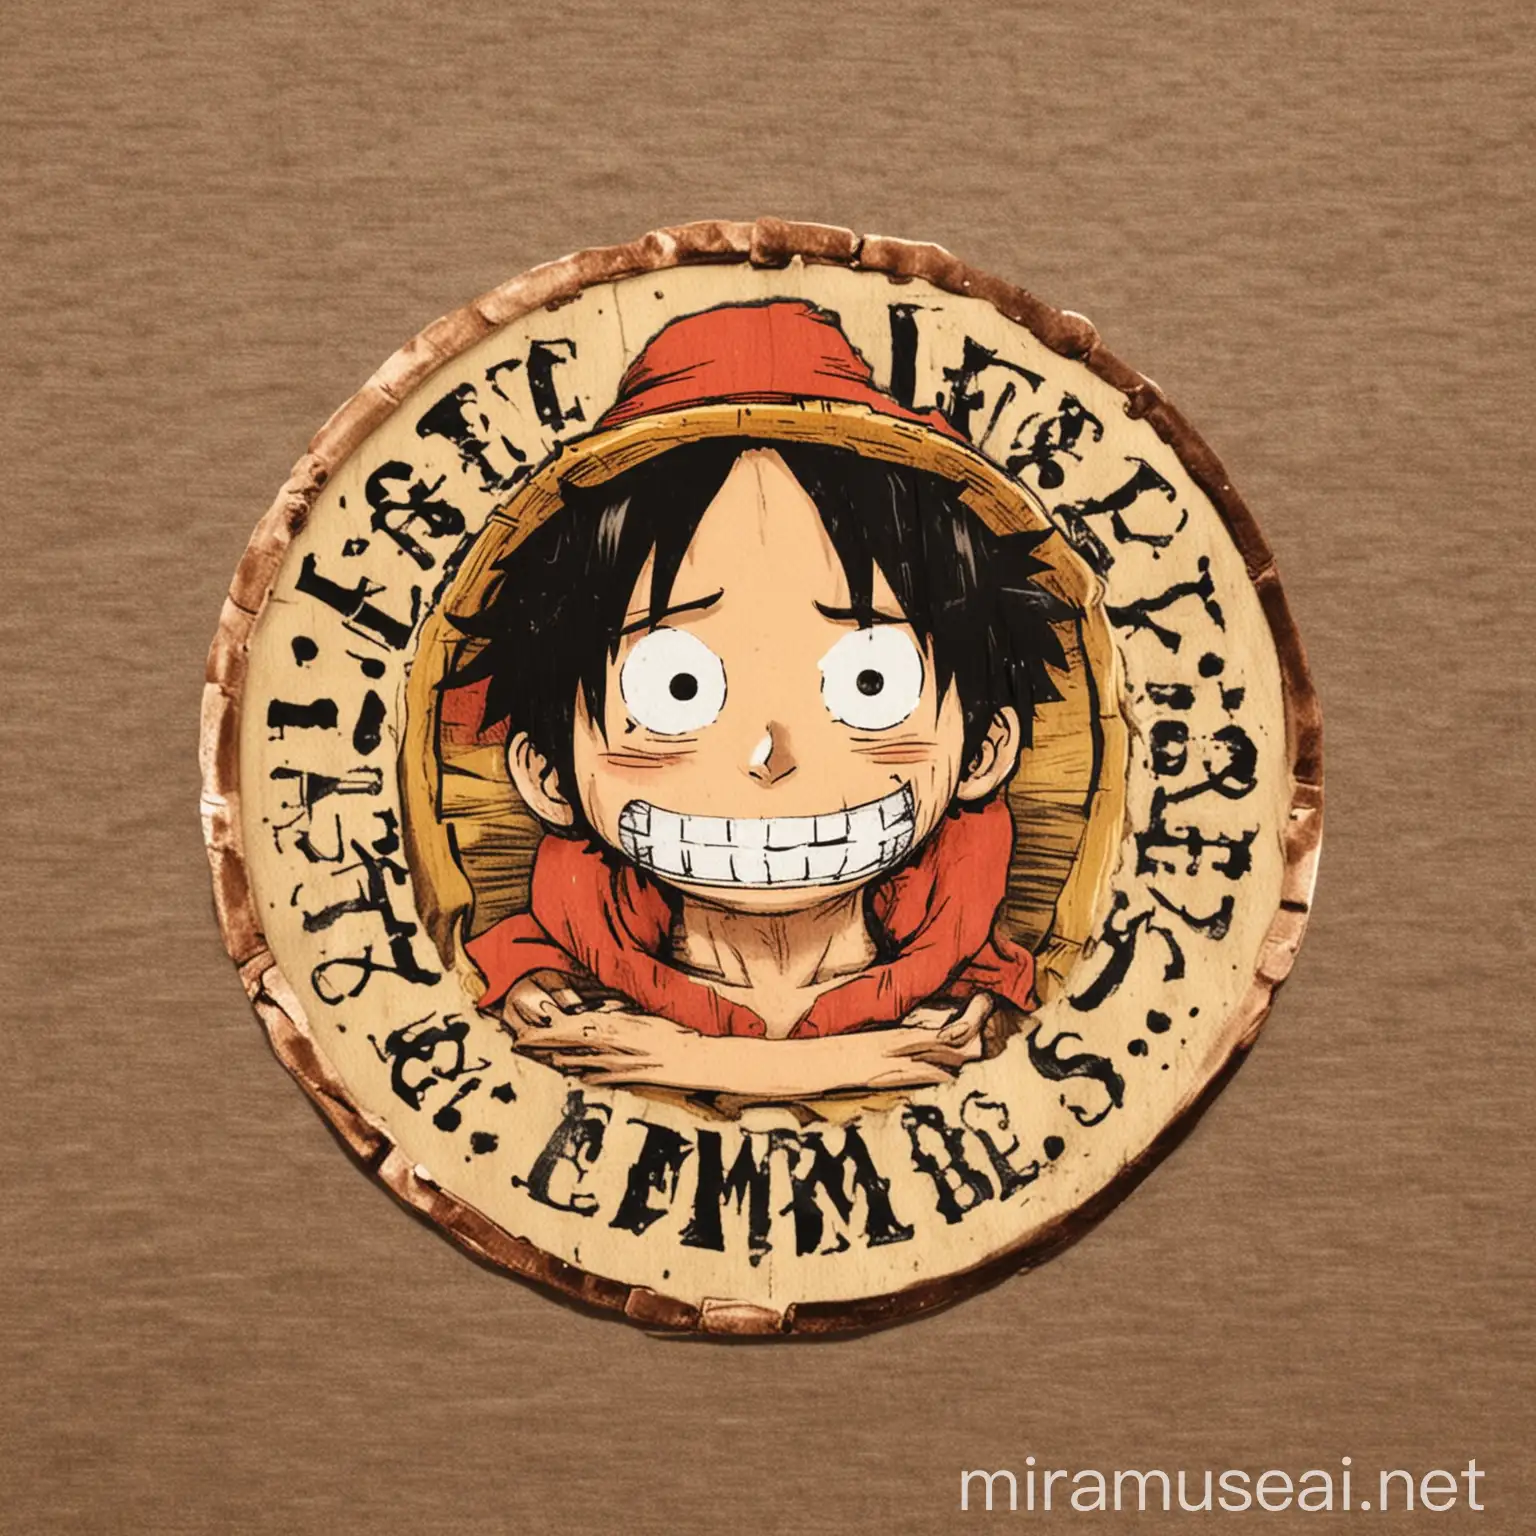 luffy logo but out thrift shop and name "embabs" in the middle